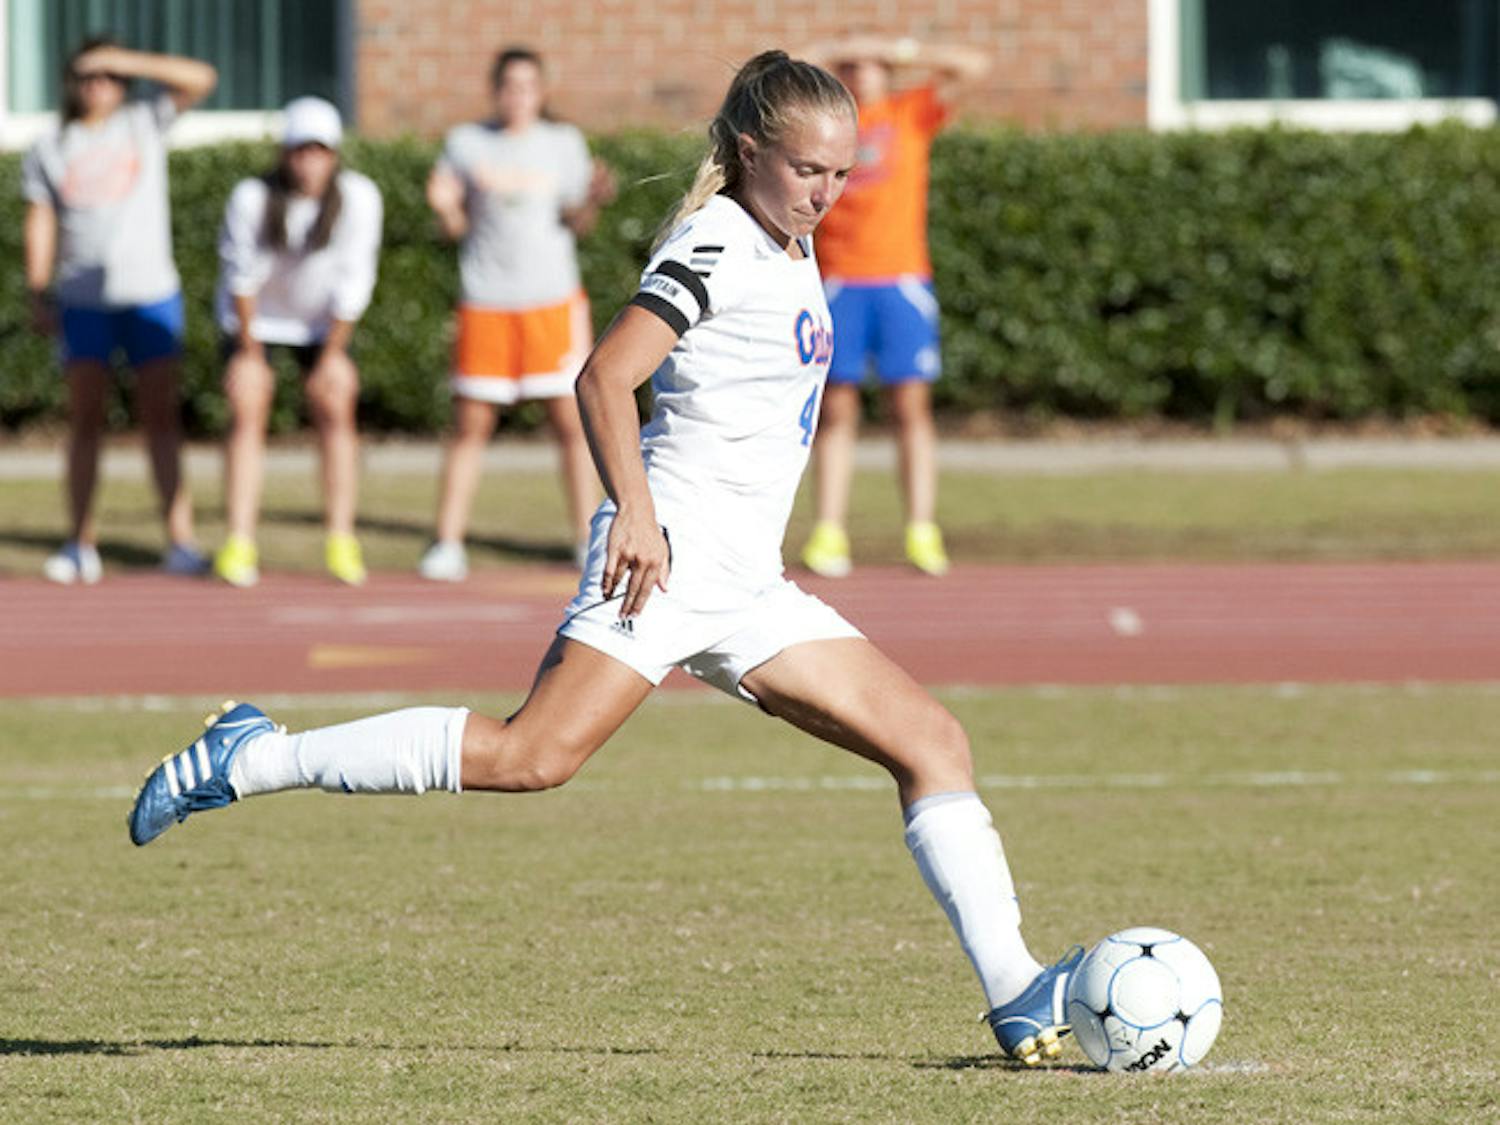 With a two-game road trip ahead, junior McKenzie Barney (pictured) said midfielder Annie Speese and the rest of the freshmen must forget about last week’s wins.